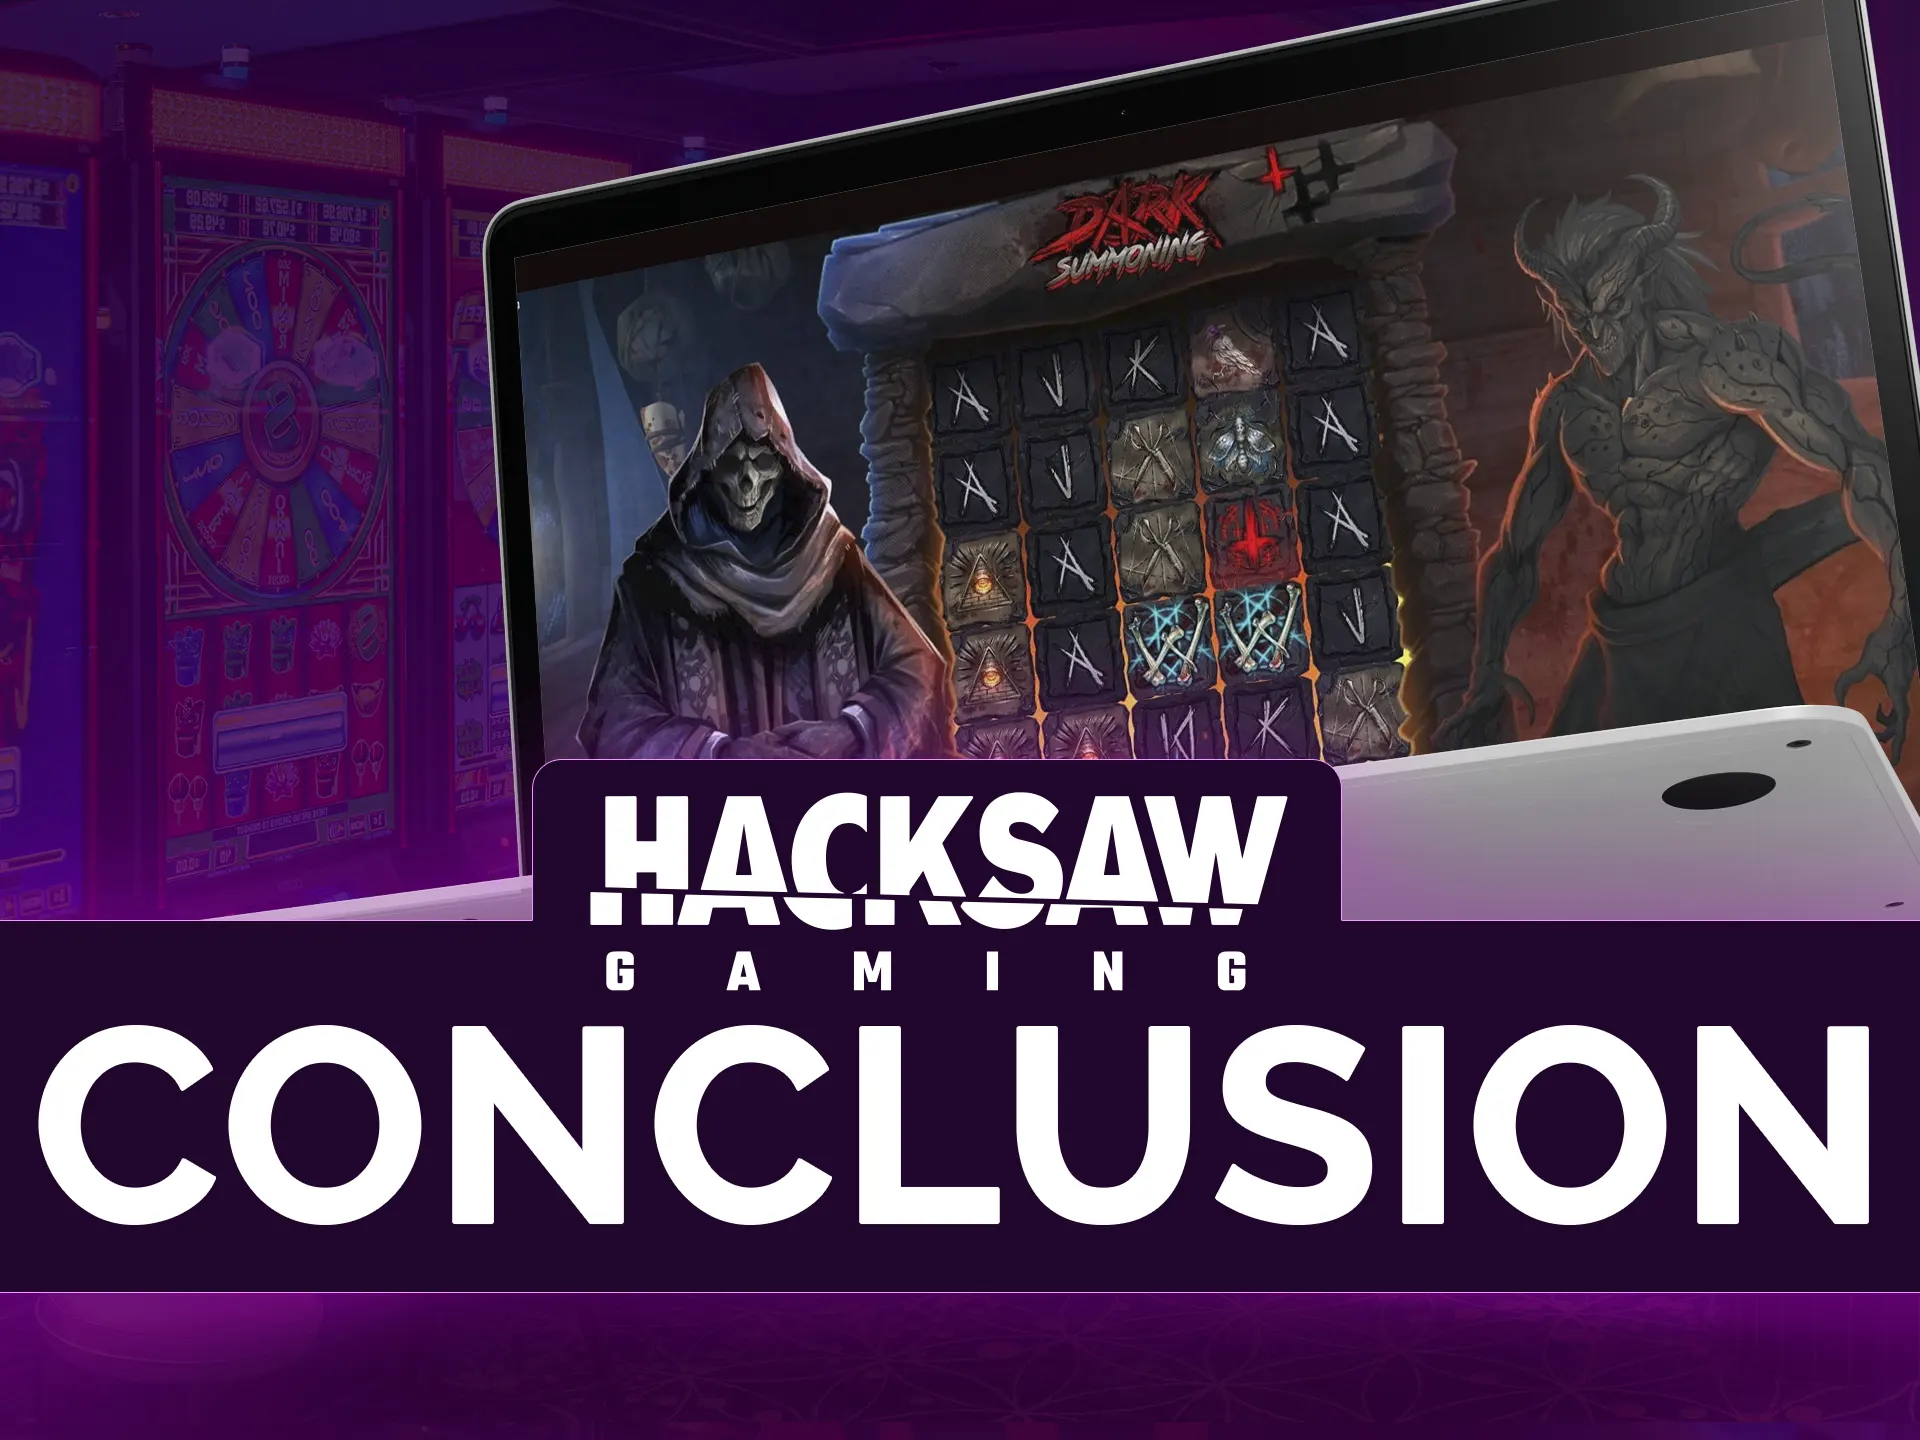 Hacksaw Gaming offers diverse, high-quality slots with mobile-friendly graphics.